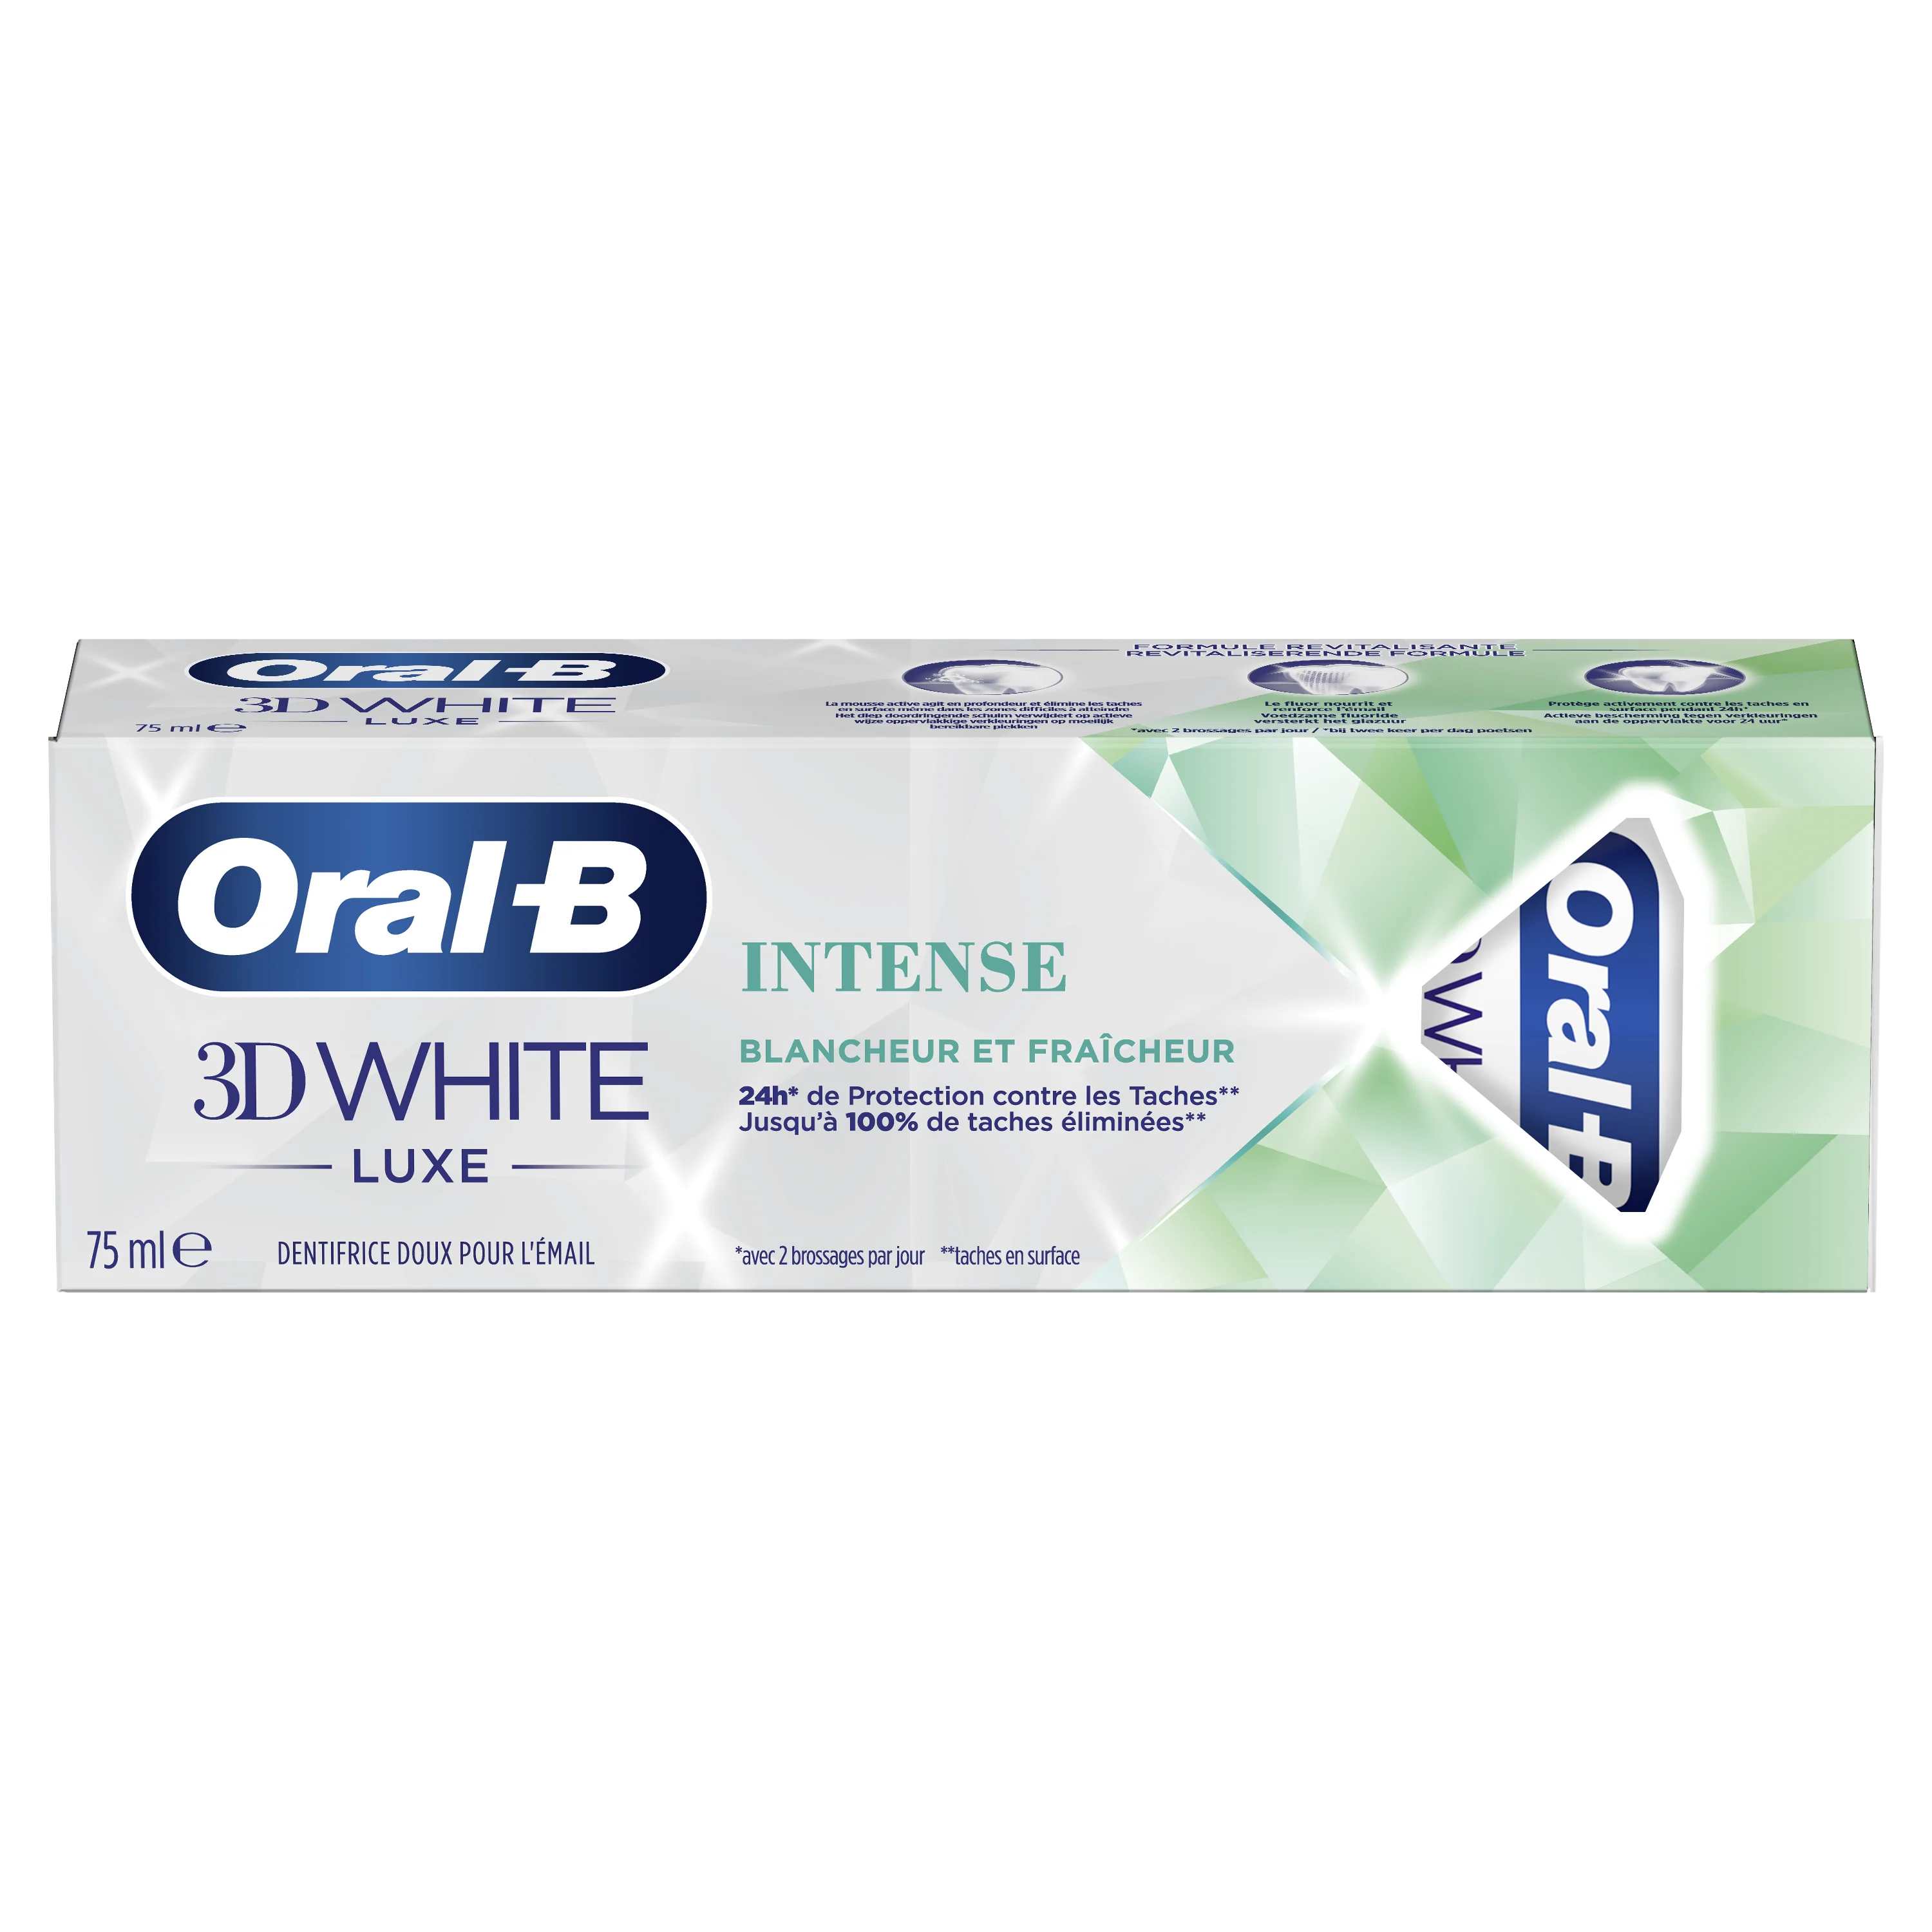 Dentifrice Oral-B 3D White Luxe Intense 